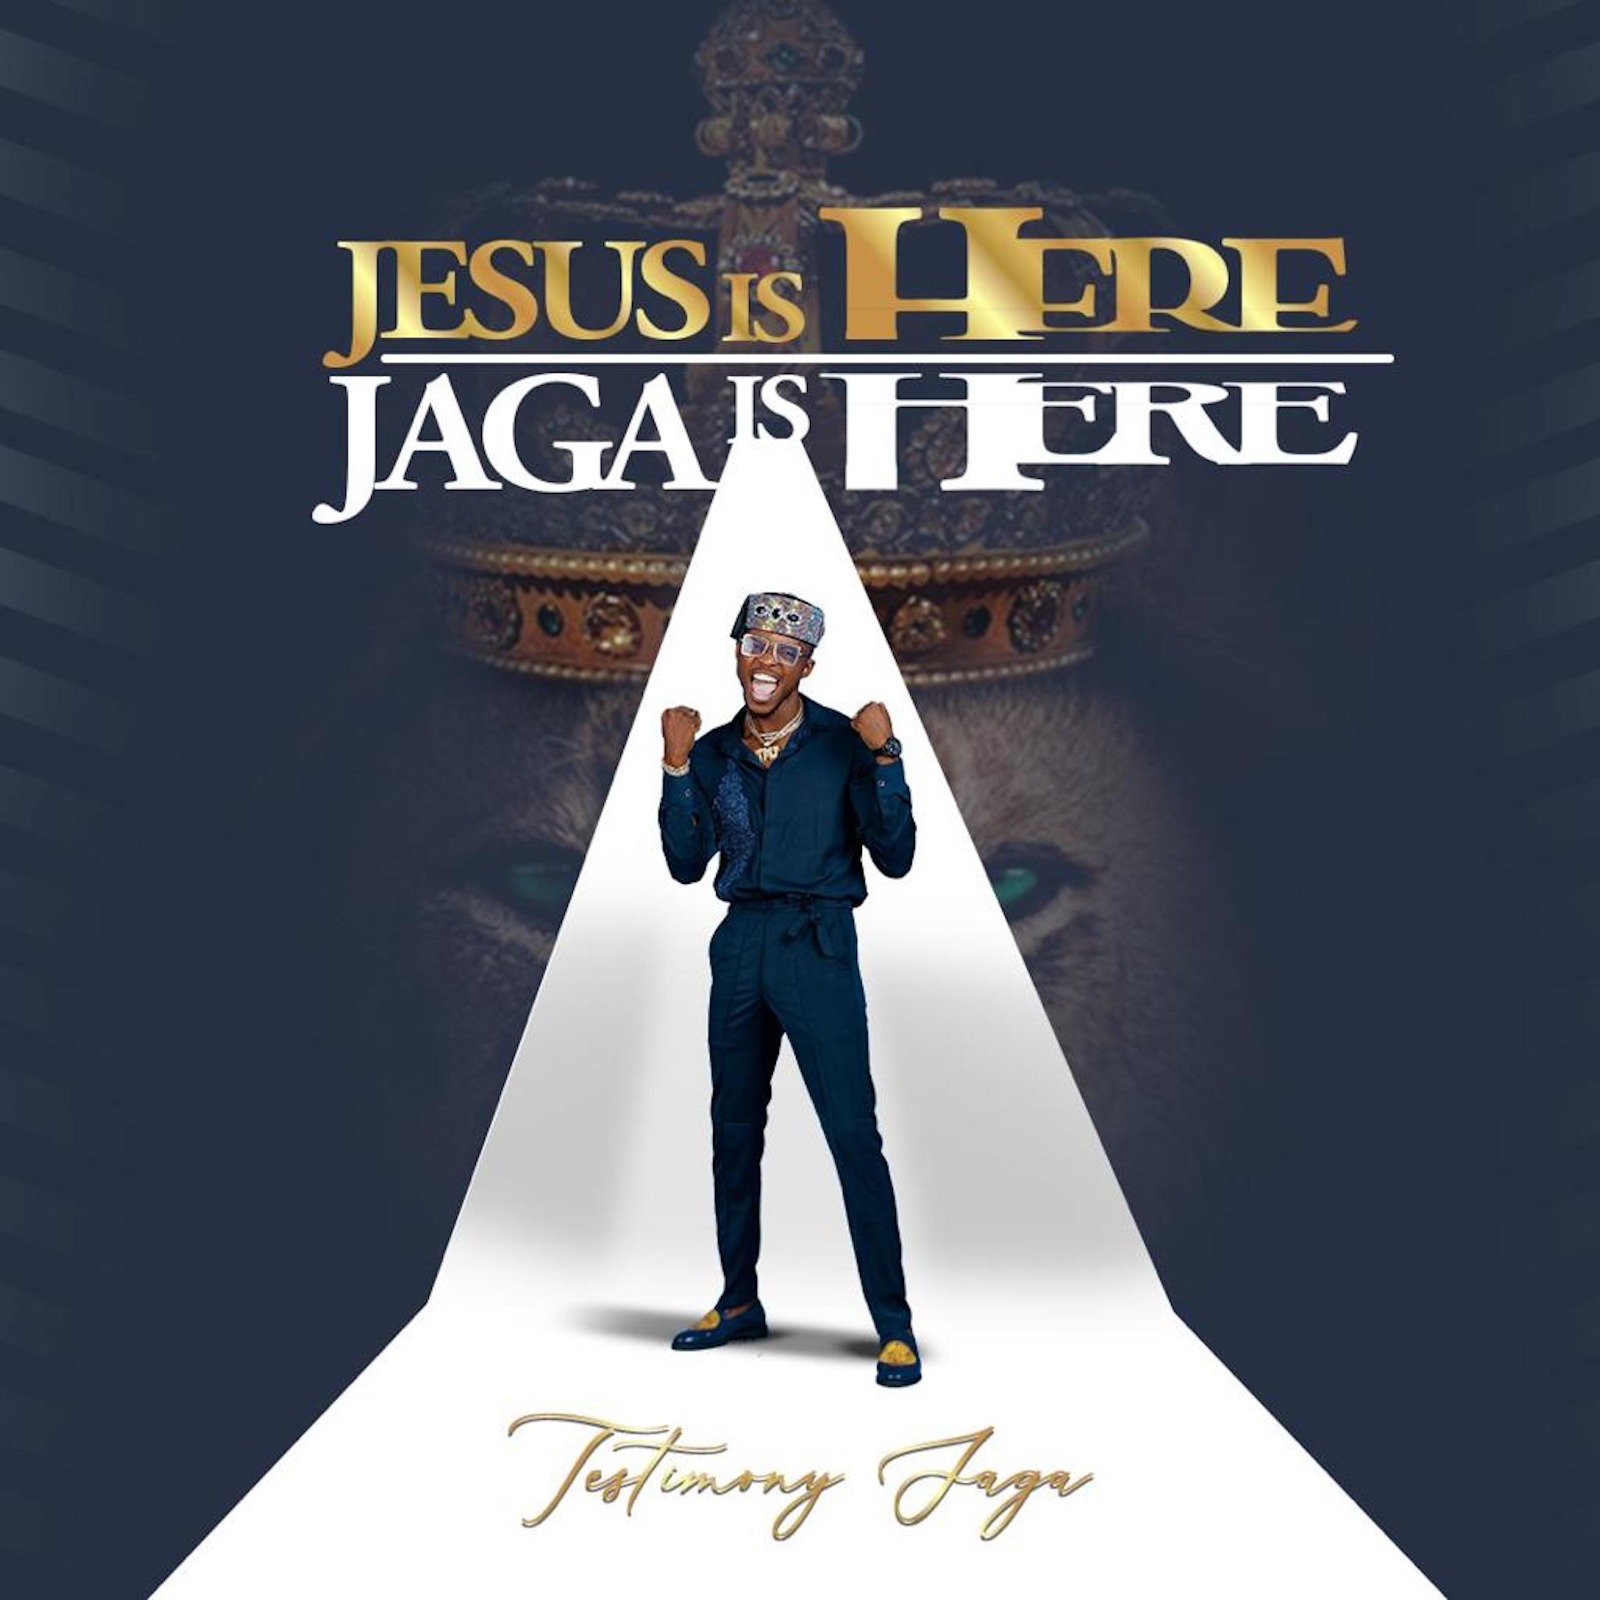 Jesus Is Here, Jaga Is Here (The EP) by Testimony Jaga